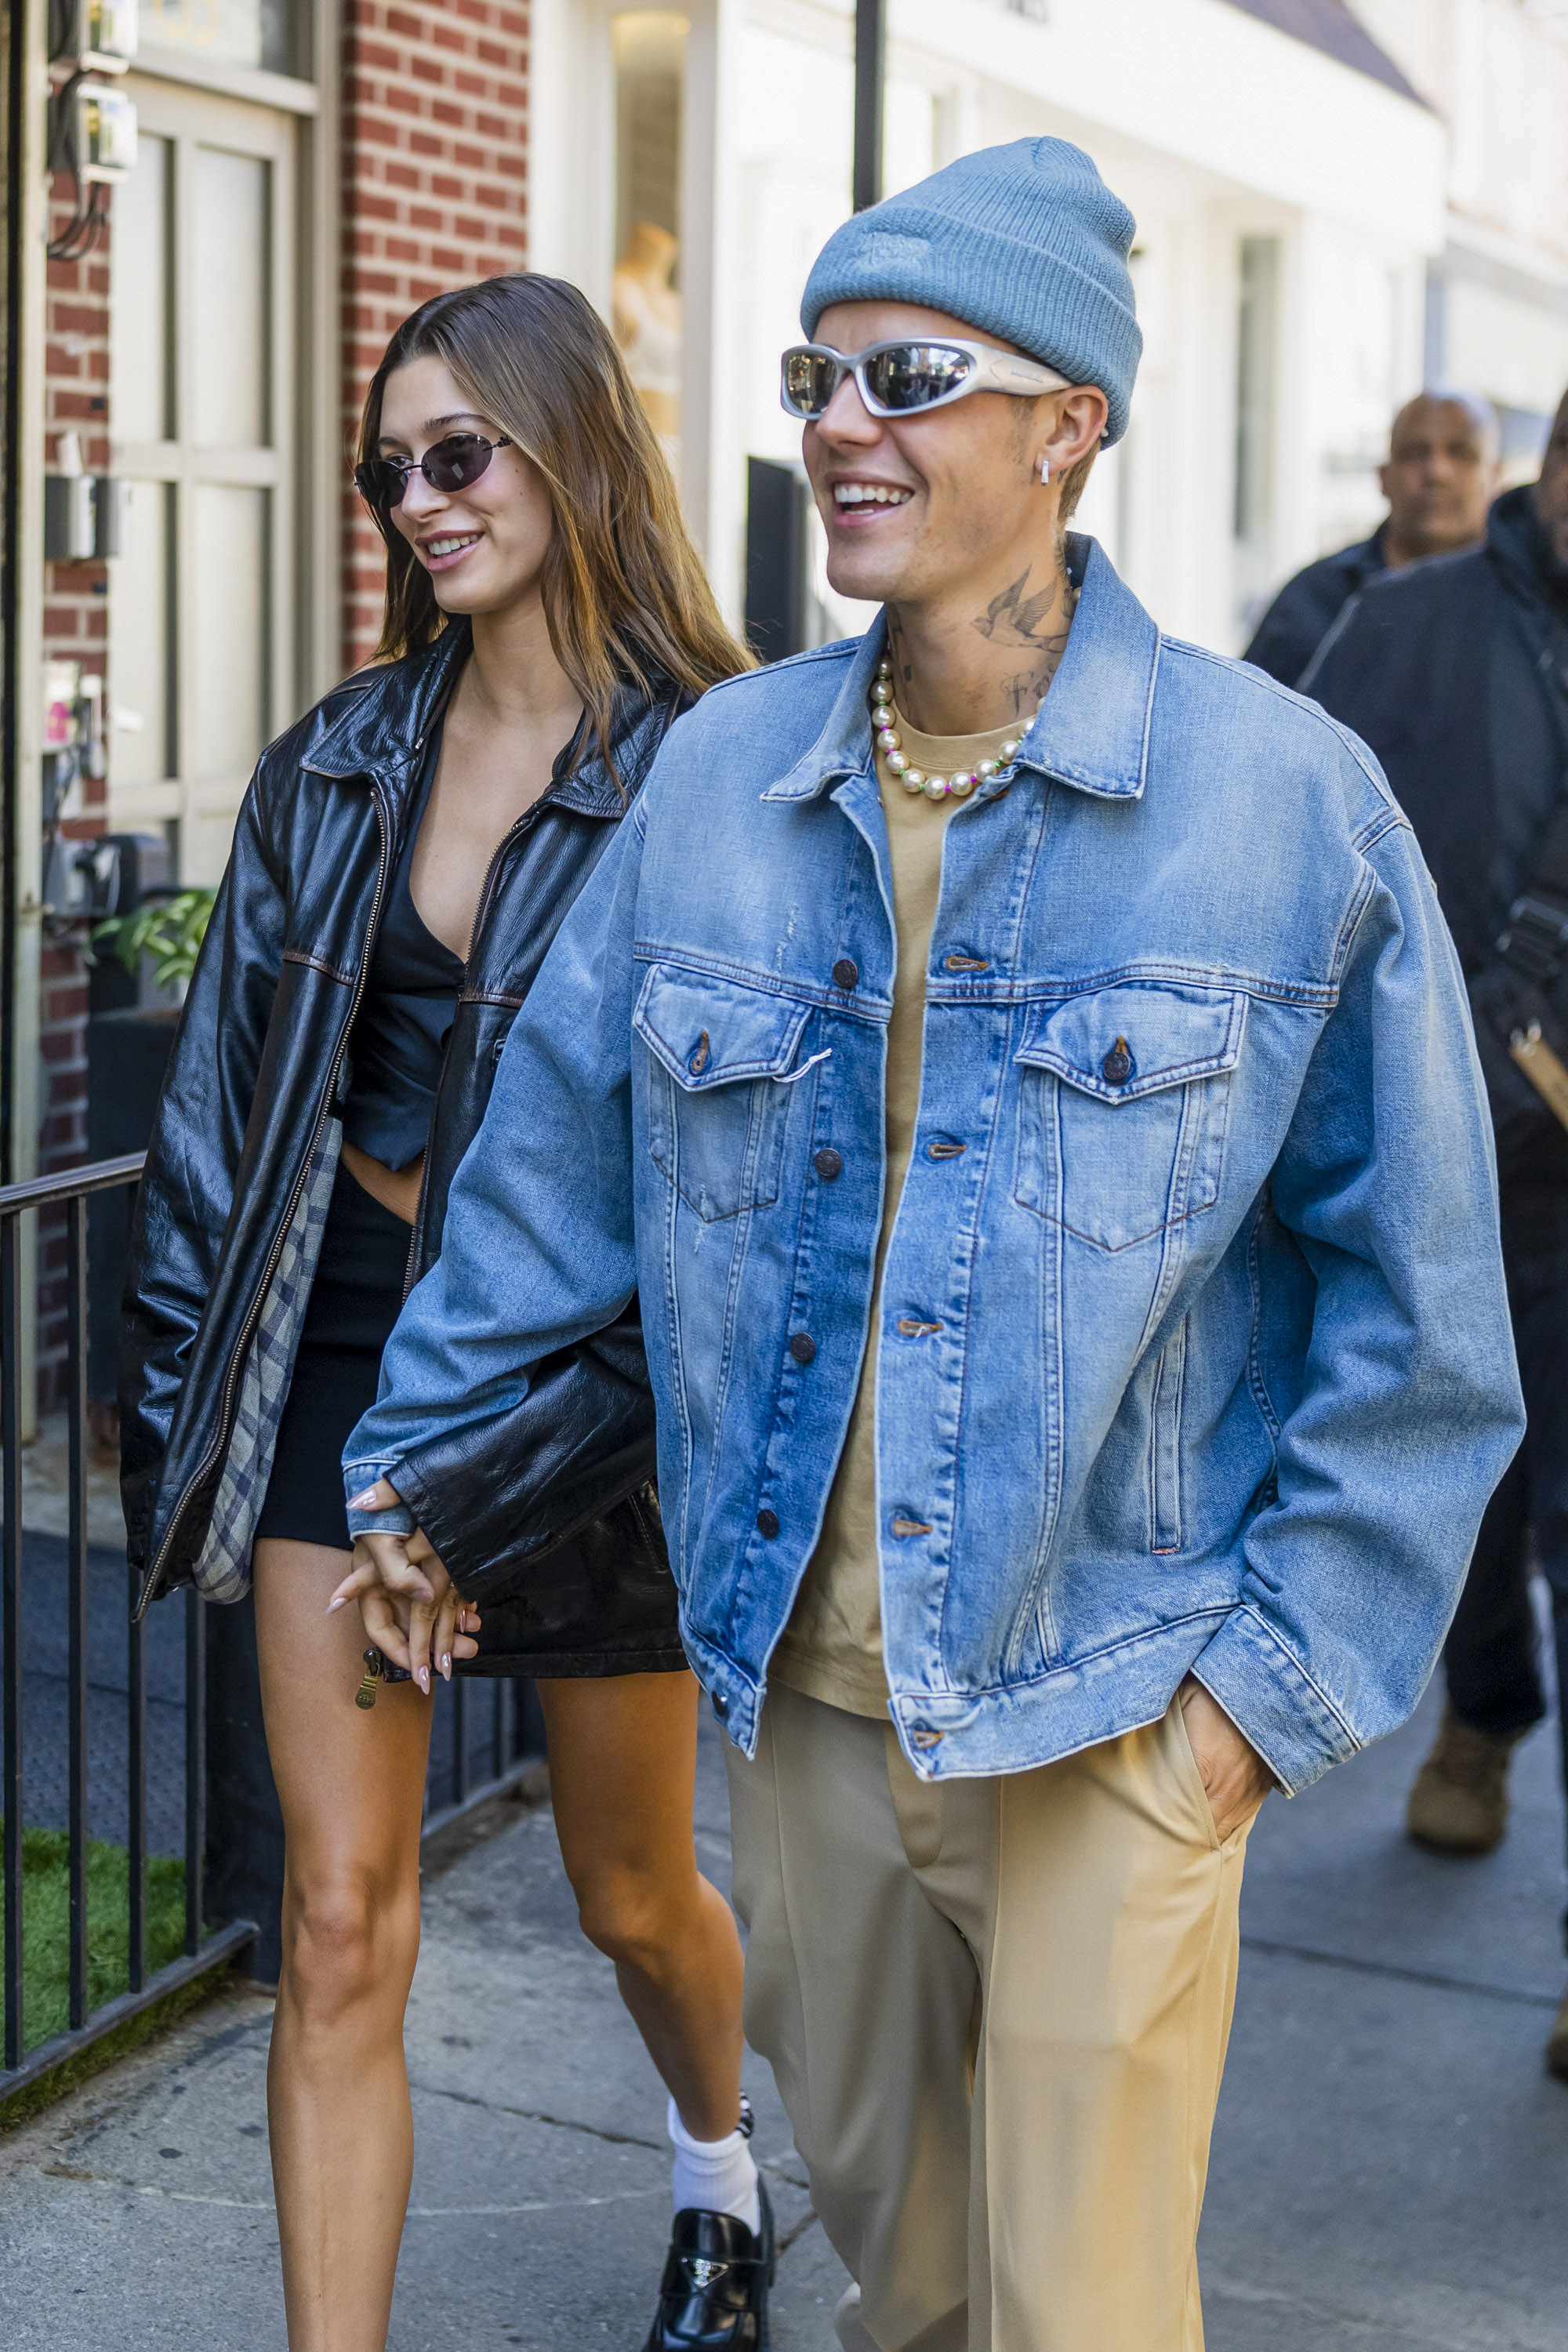 Justin and Hailey Bieber took a romantic walk through the streets of New York, where they traveled to enjoy a few days of vacation and also to fulfill work commitments.  The couple stopped at a renowned cafe and set a trend with their look: the singer wore a set of beige pants and shirt and a jean jacket, which he combined with sunglasses and a wool hat, while the model opted for a look total black skirt, top and leather jacket.  Also, she wore sunglasses.